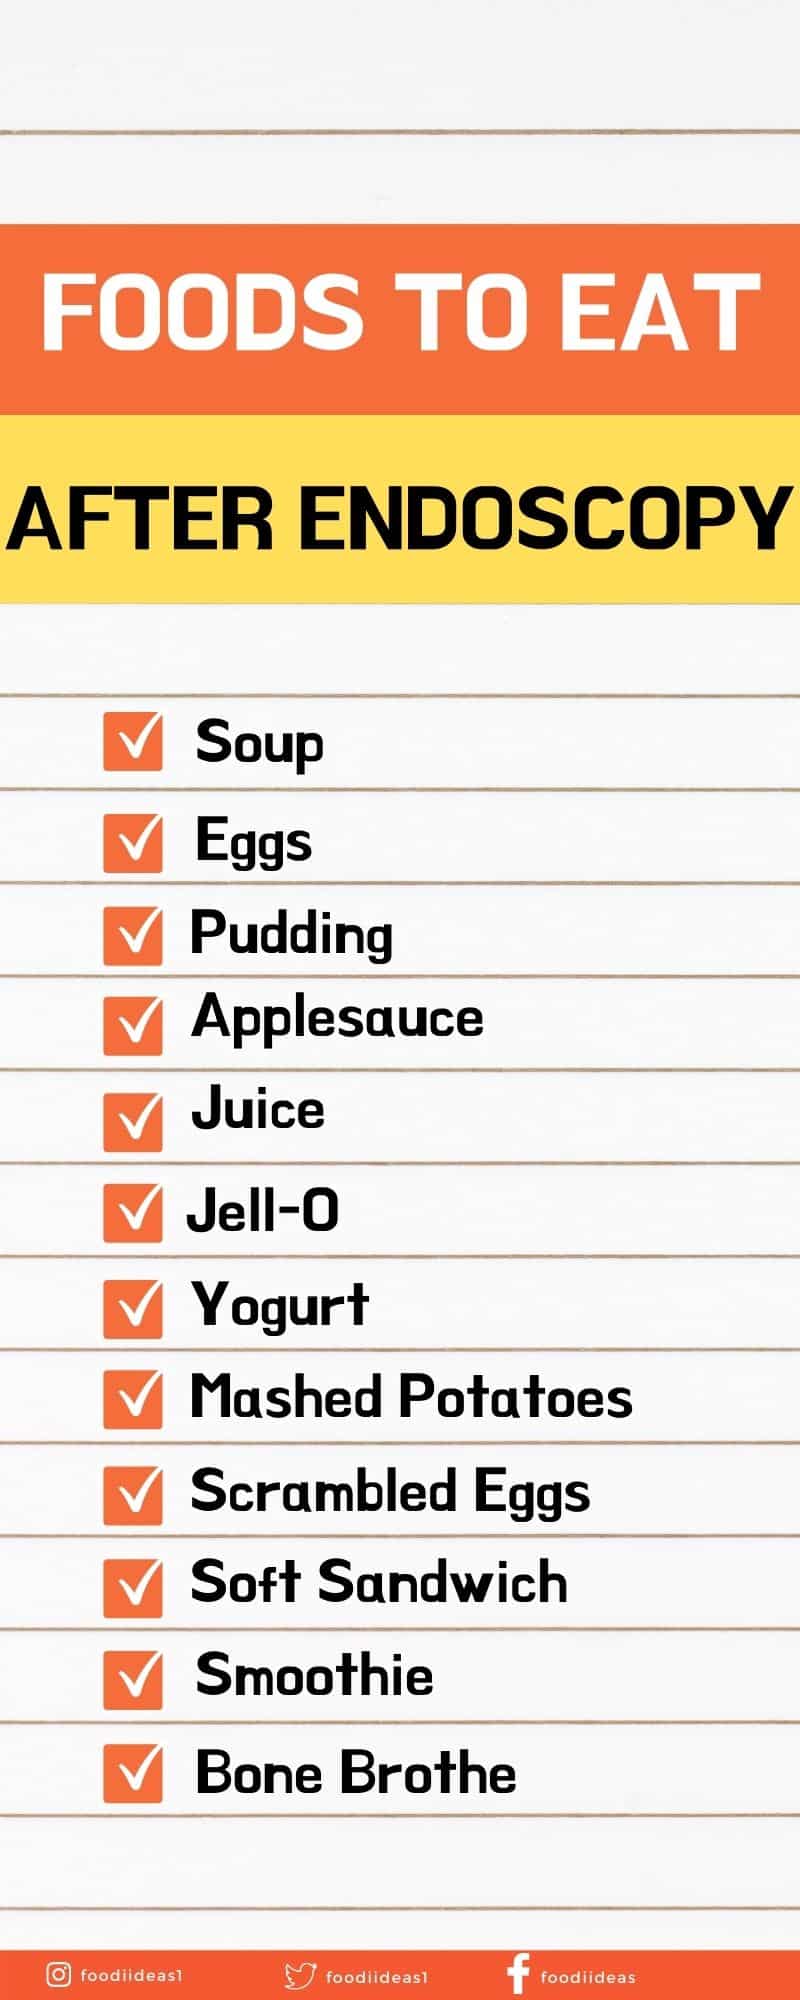 foods to eat after endoscopy